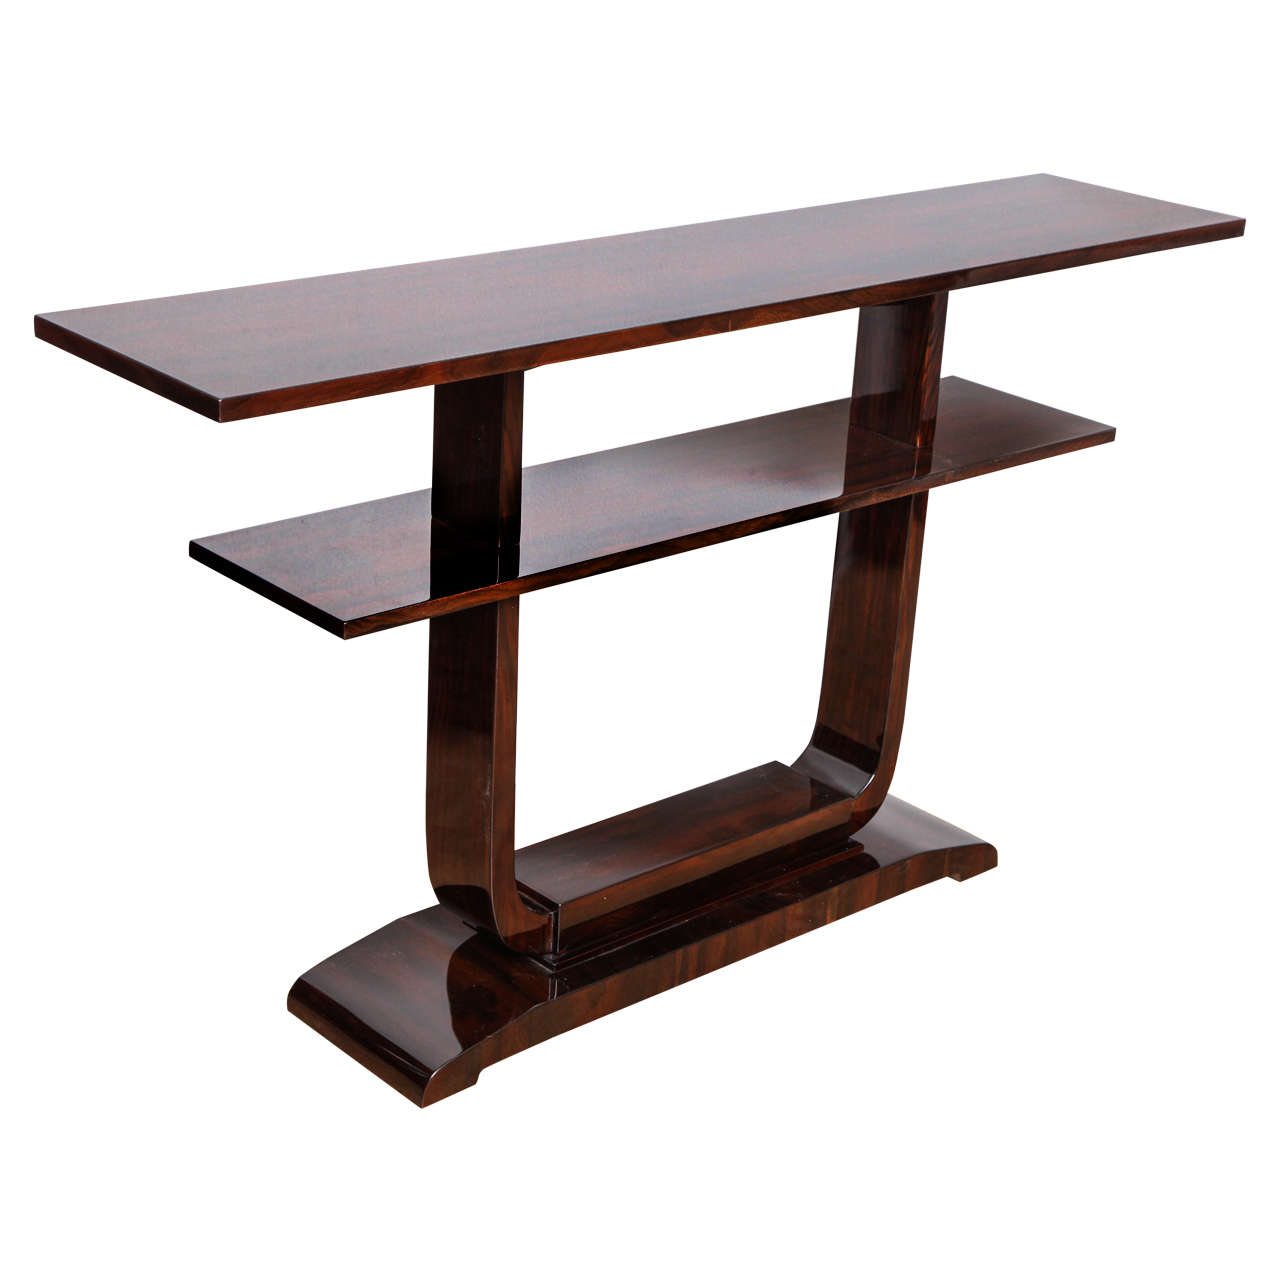 Sleek Art Deco Console Table with Shelves For Sale